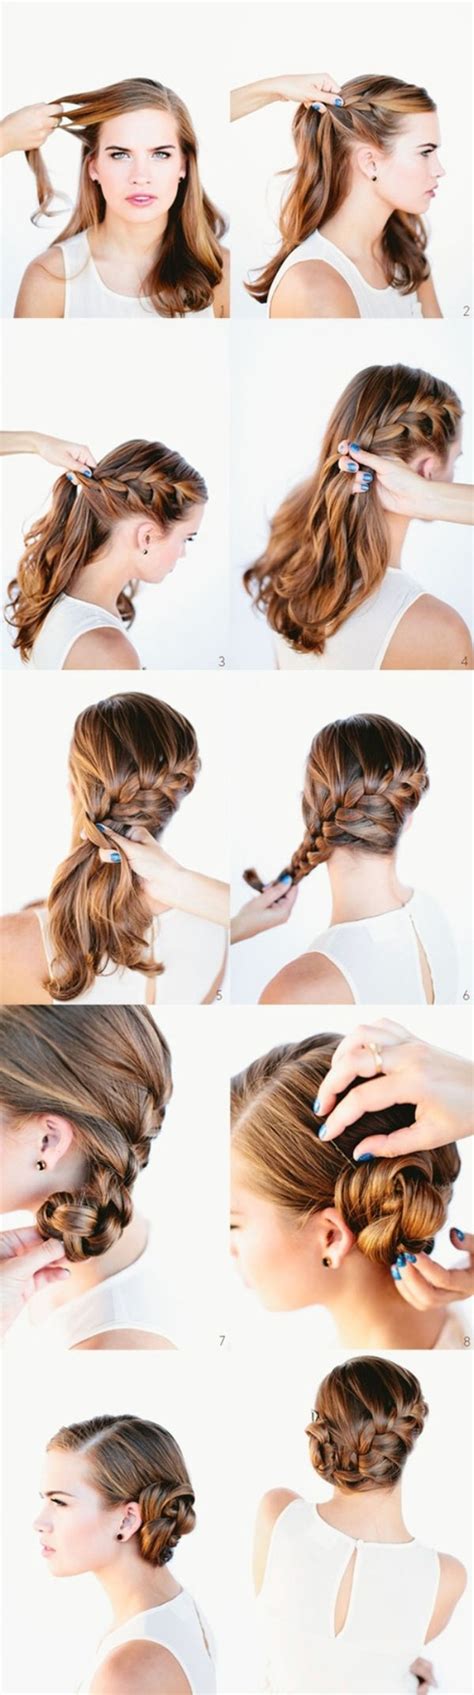 15 Simple And Cute Hairstyle Tutorials